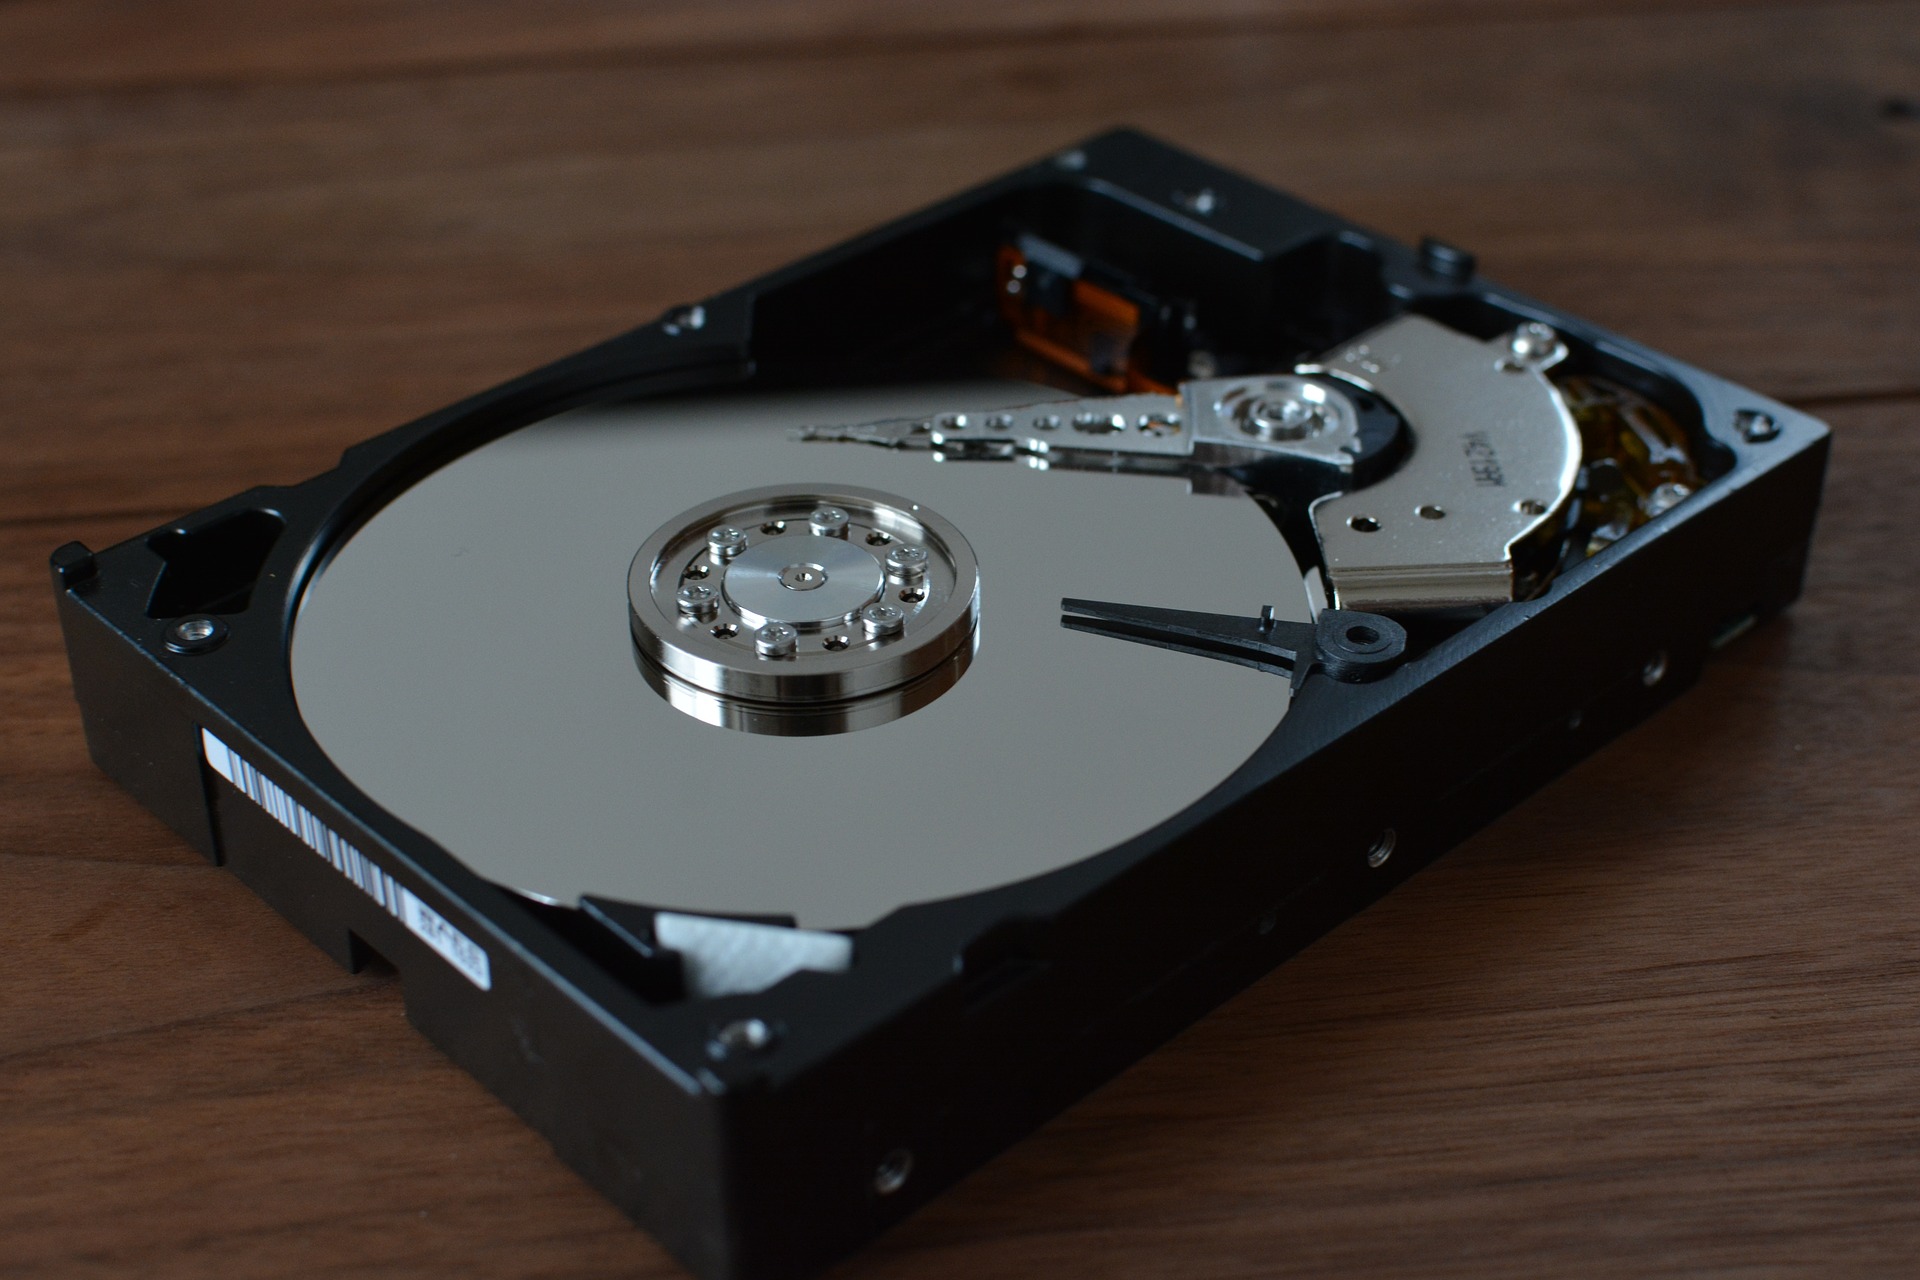 How to adjust TLER value on hard disk (for data recovery)